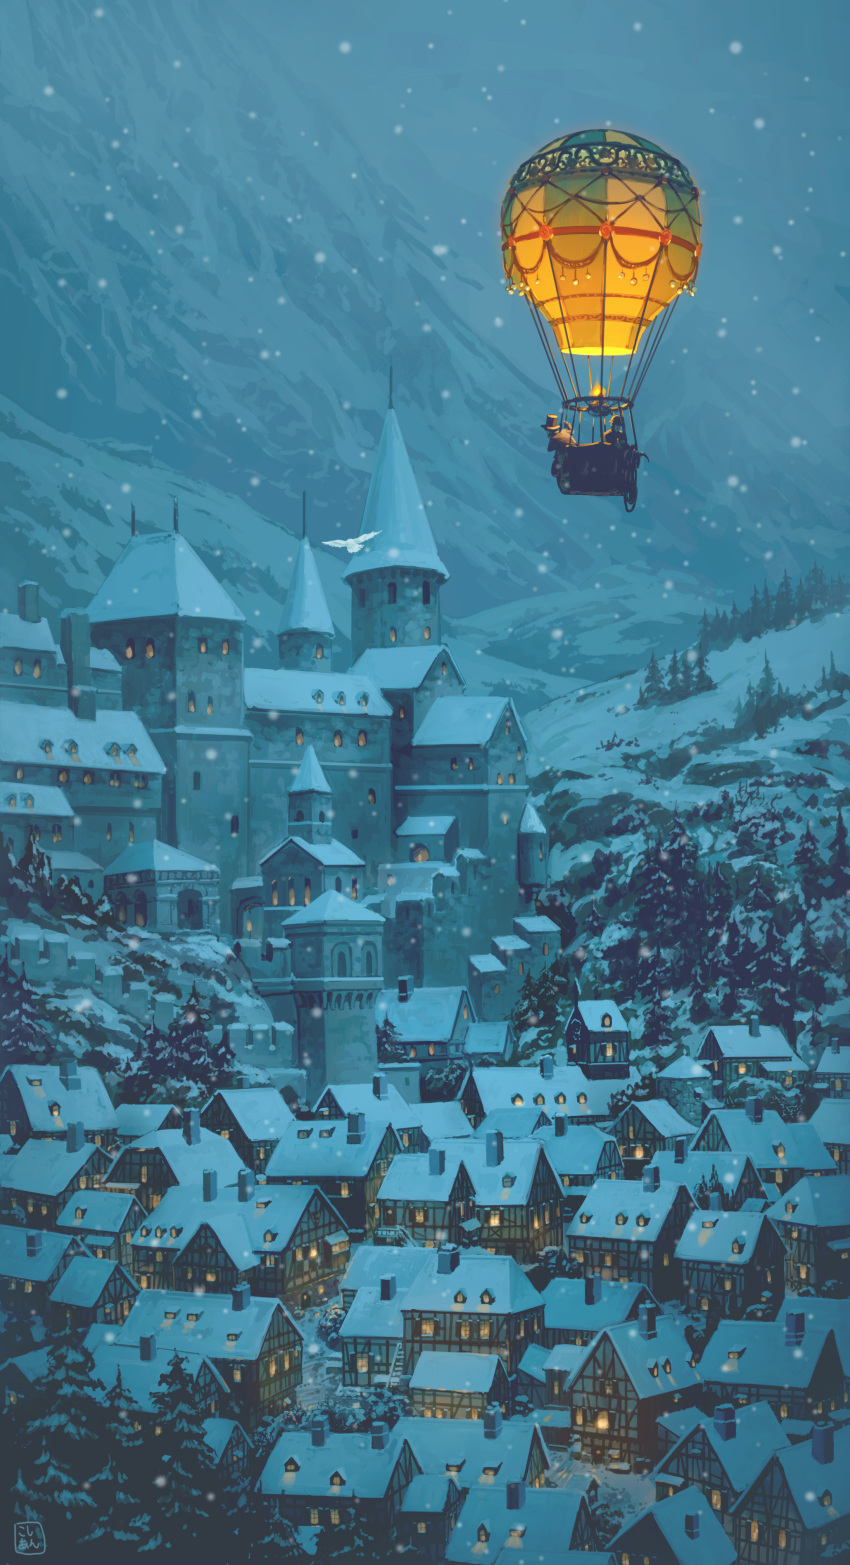 2boys absurdres aircraft bird building castle hat highres hot_air_balloon house kosian mountain multiple_boys night original outdoors scenery snow snowing top_hat town winter